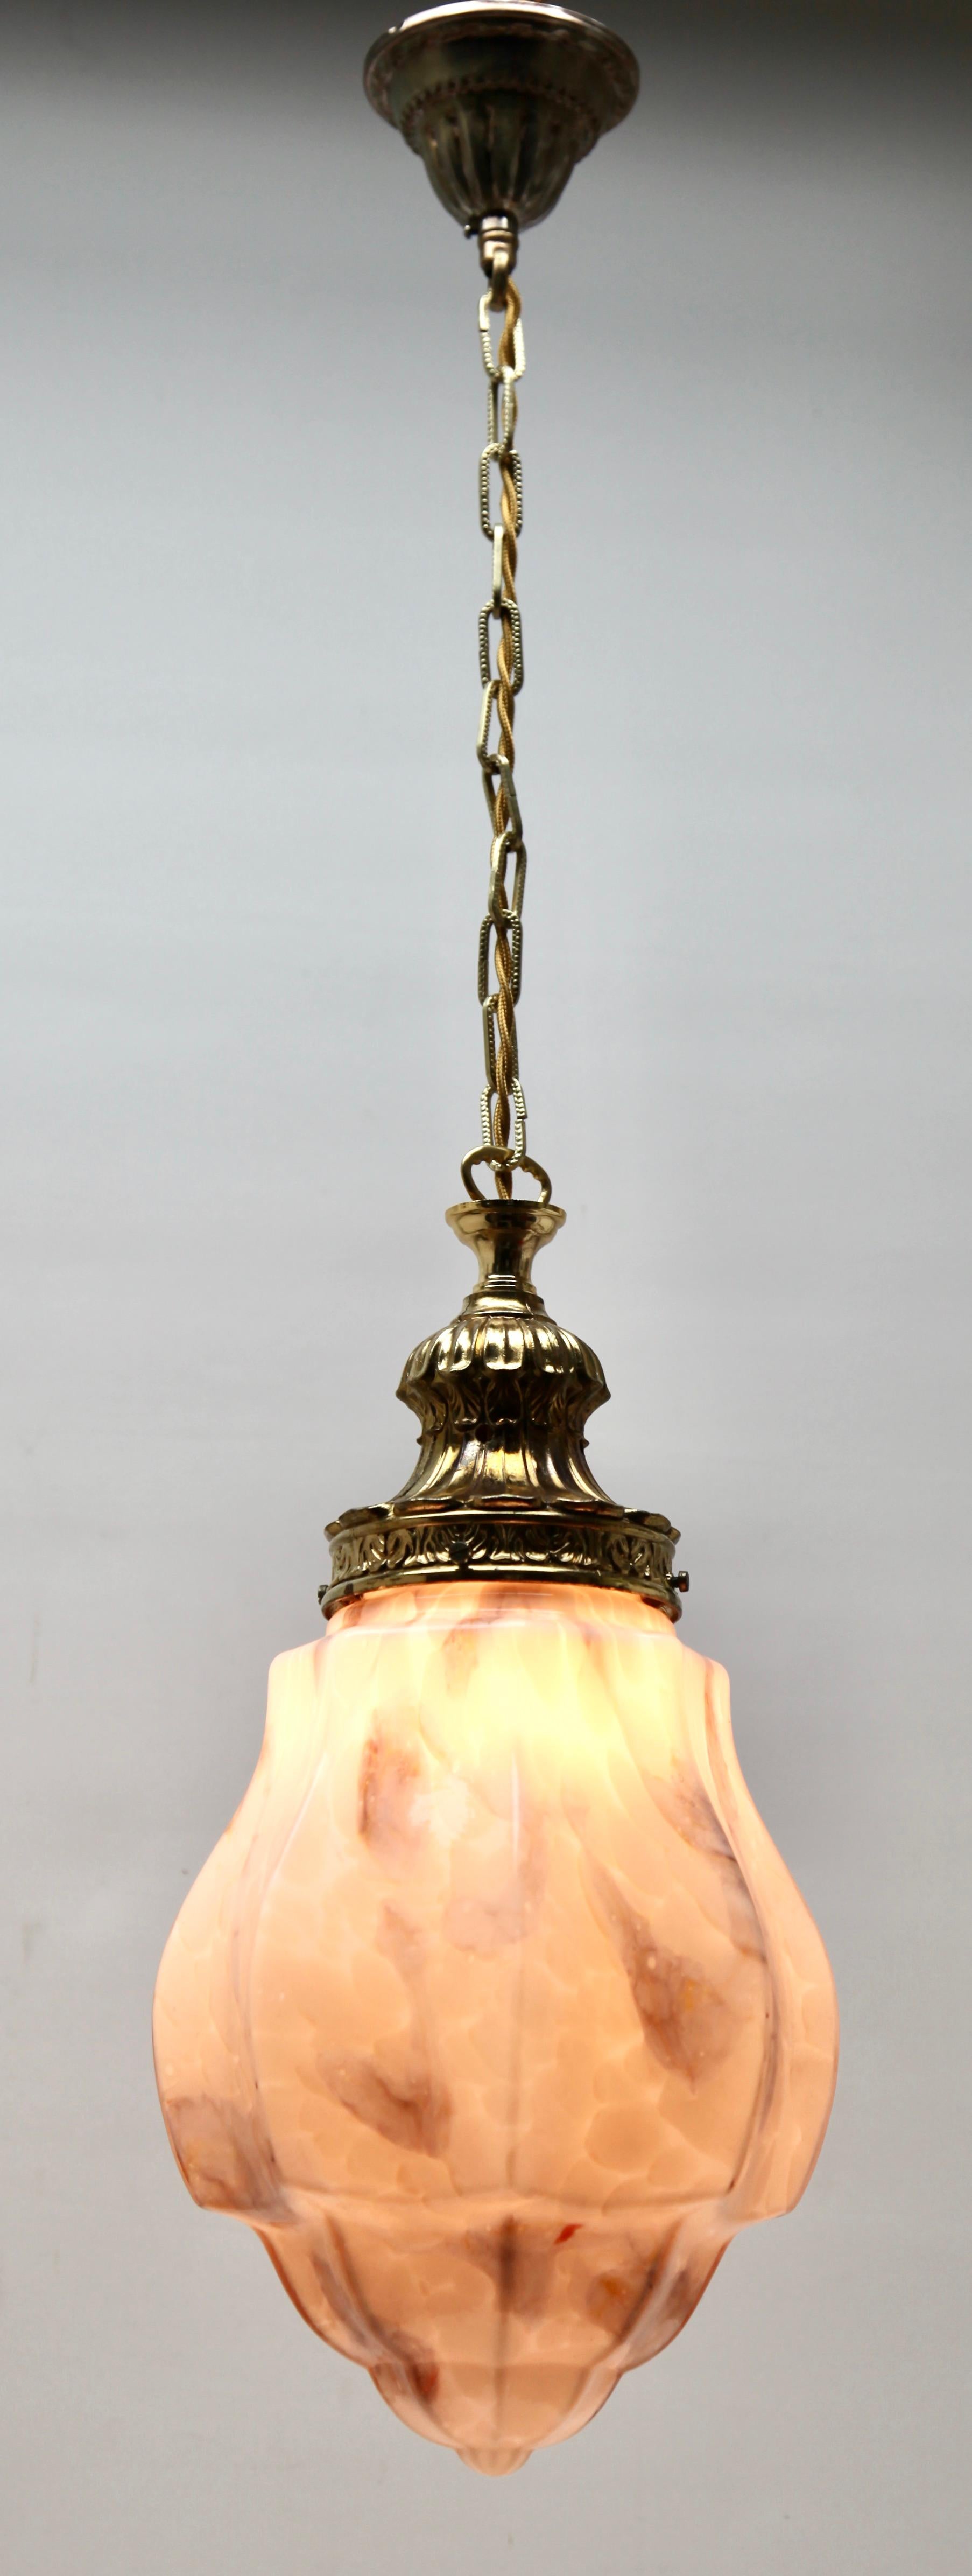 Scailmont Pendant Lamp with a Opaline Shade and Brass Fittings, 1930s, Belgium 3